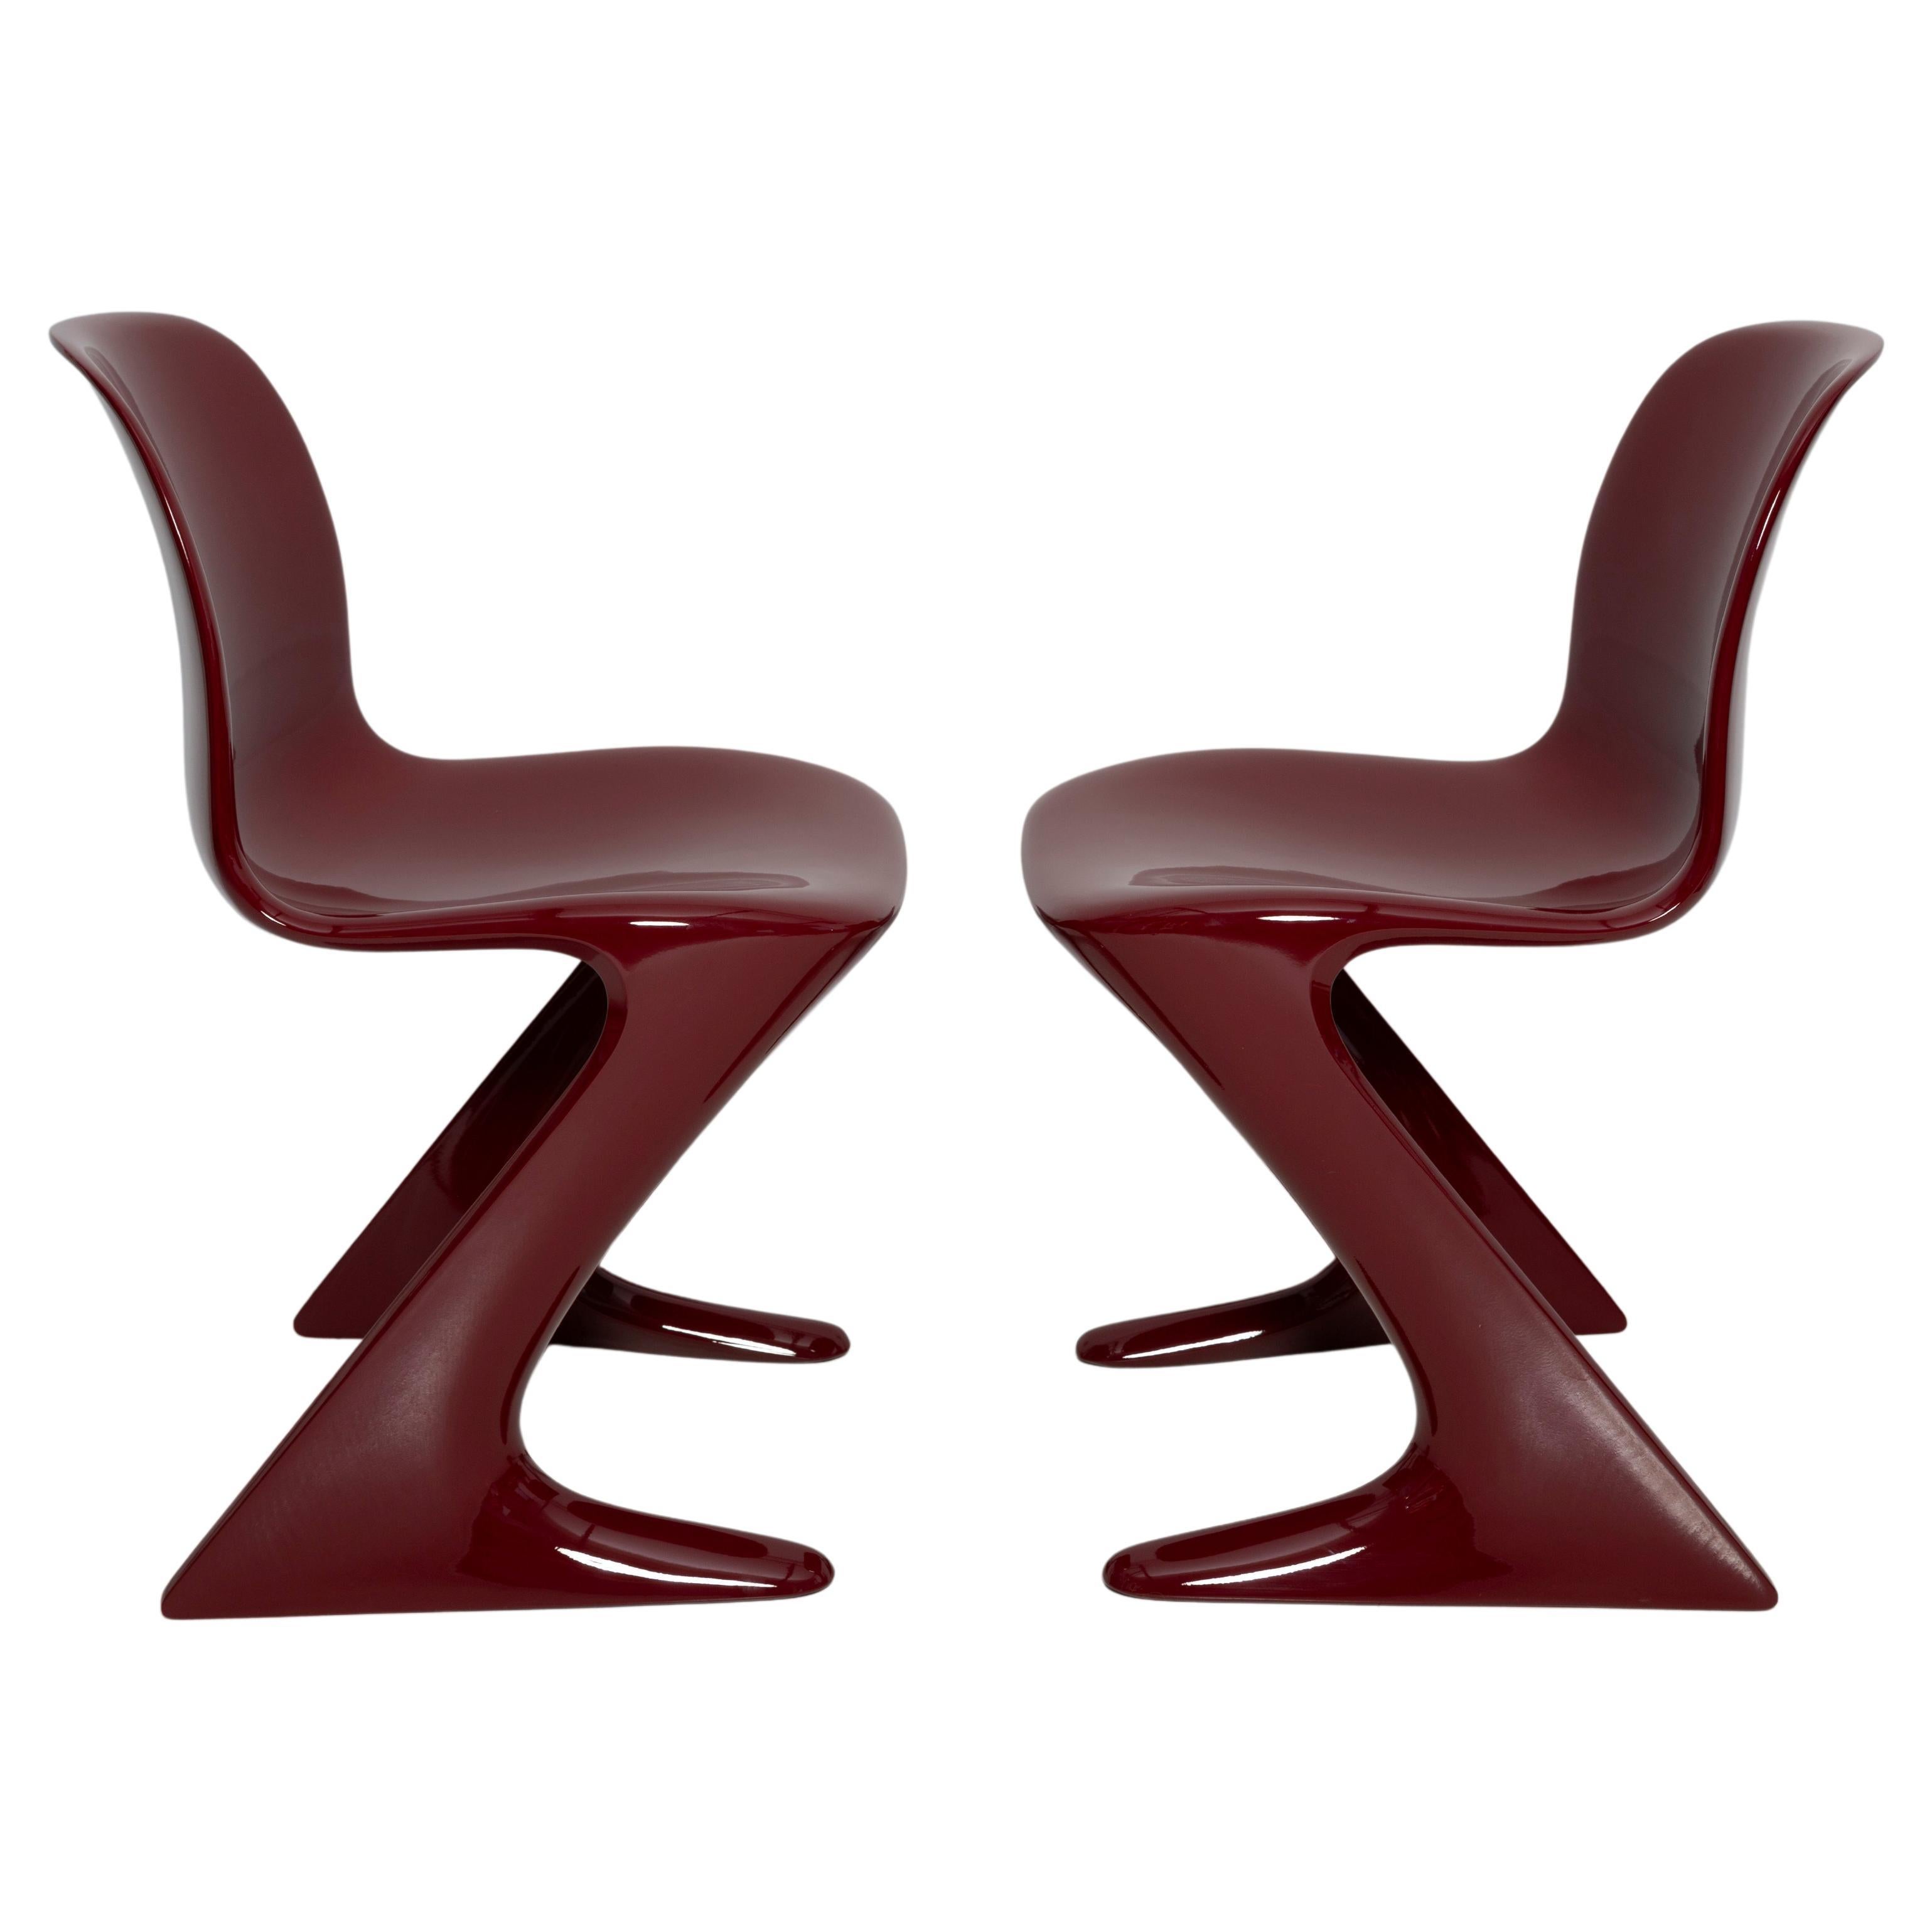 Pair of Dark Red Wine Kangaroo Chairs Designed by Ernst Moeckl, Germany, 1968 For Sale